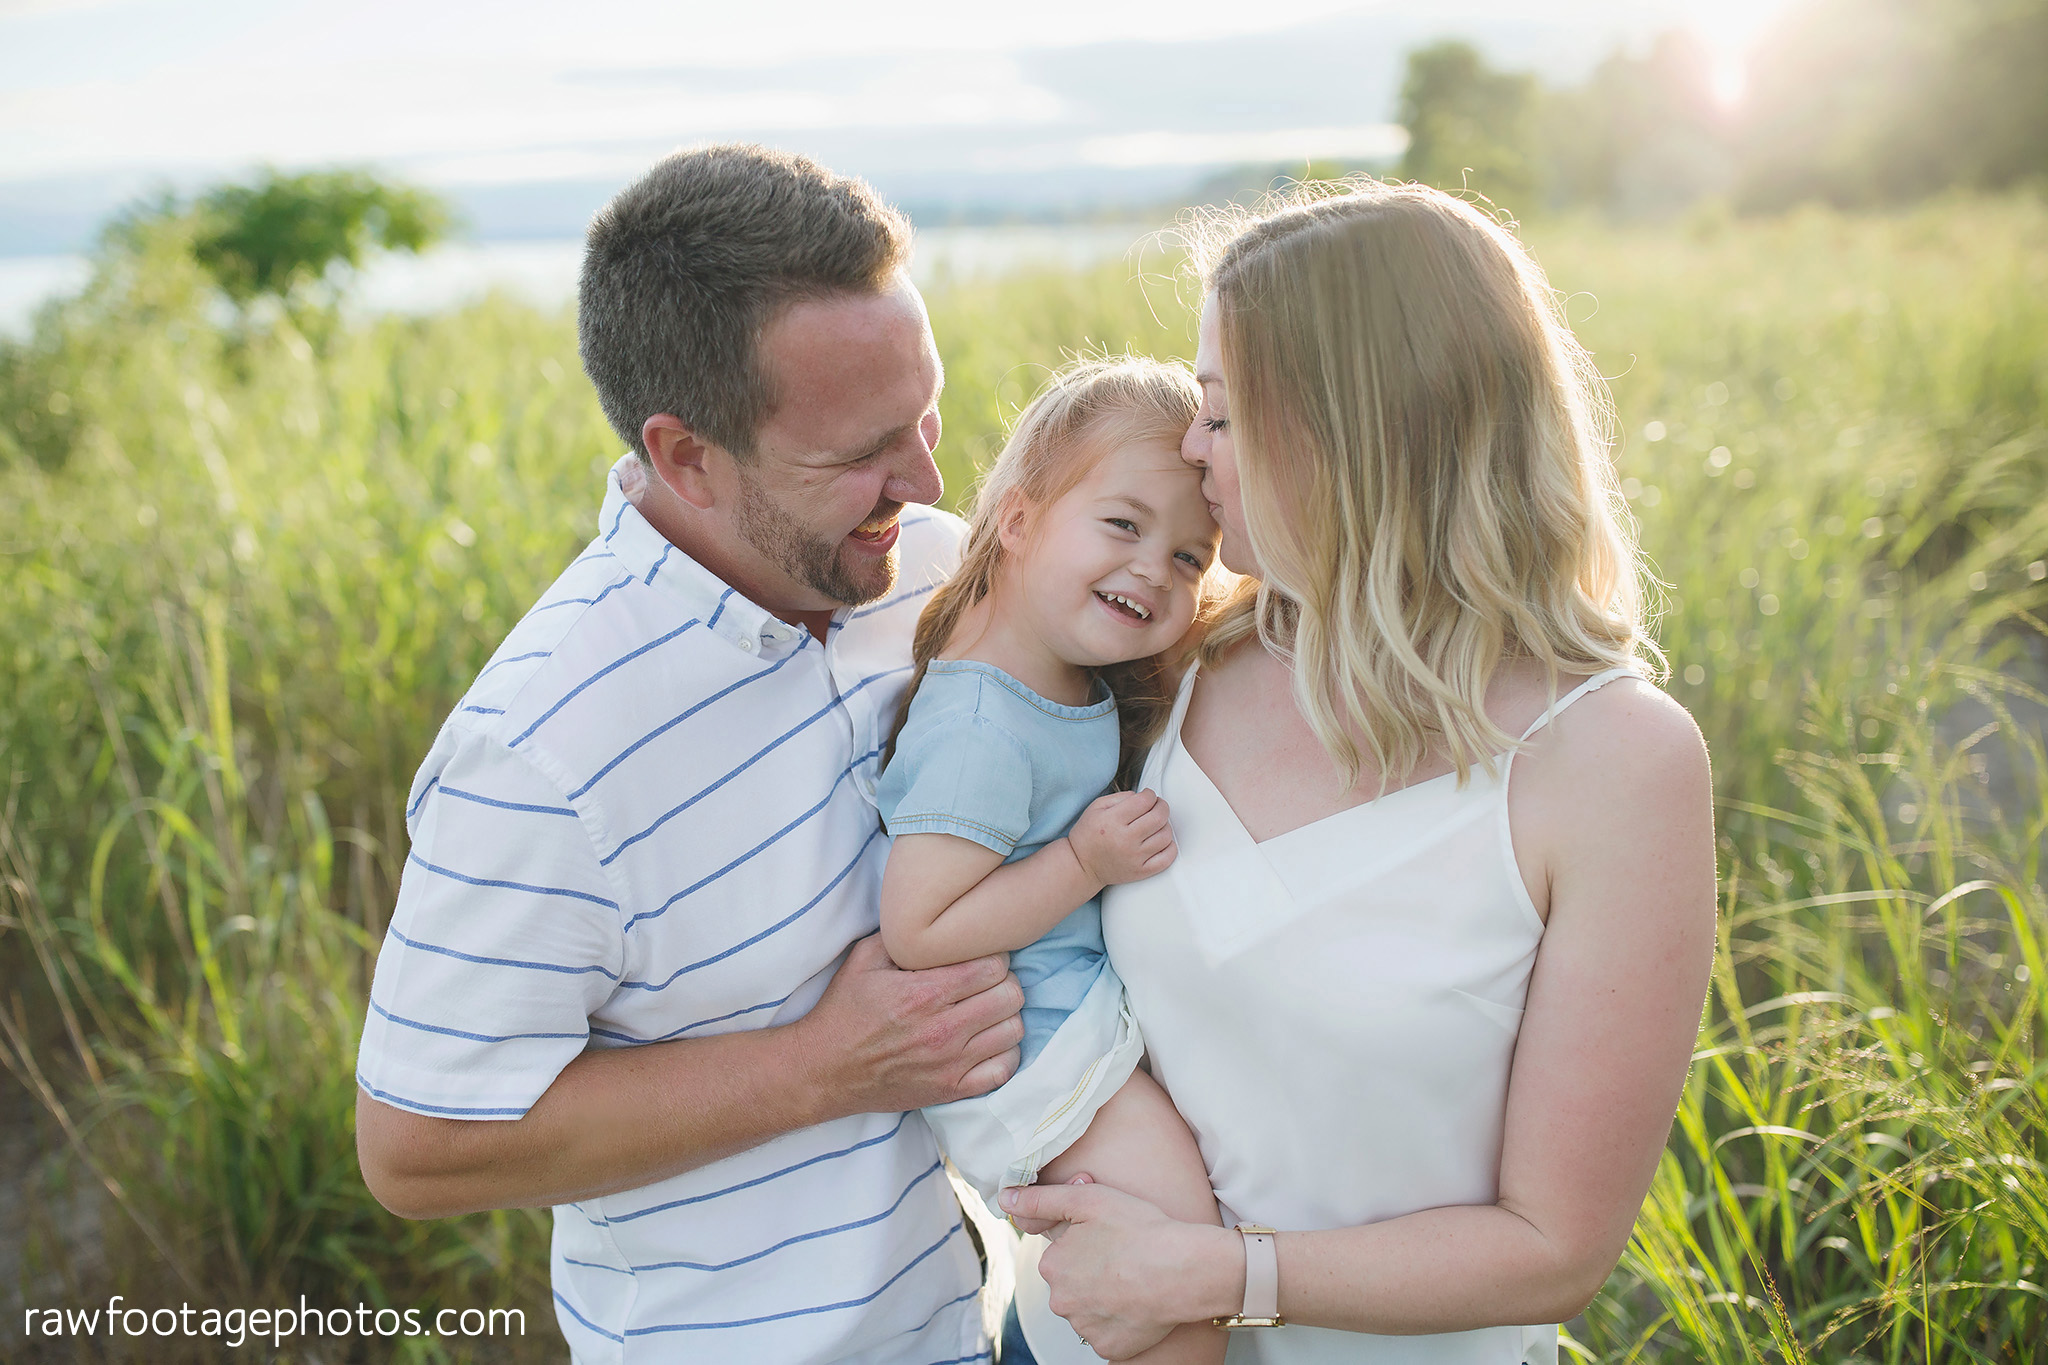 london_ontario_family_photography-lifestyle_photography-maternity_photos-raw_footage_photography-best_of_2018018.jpg